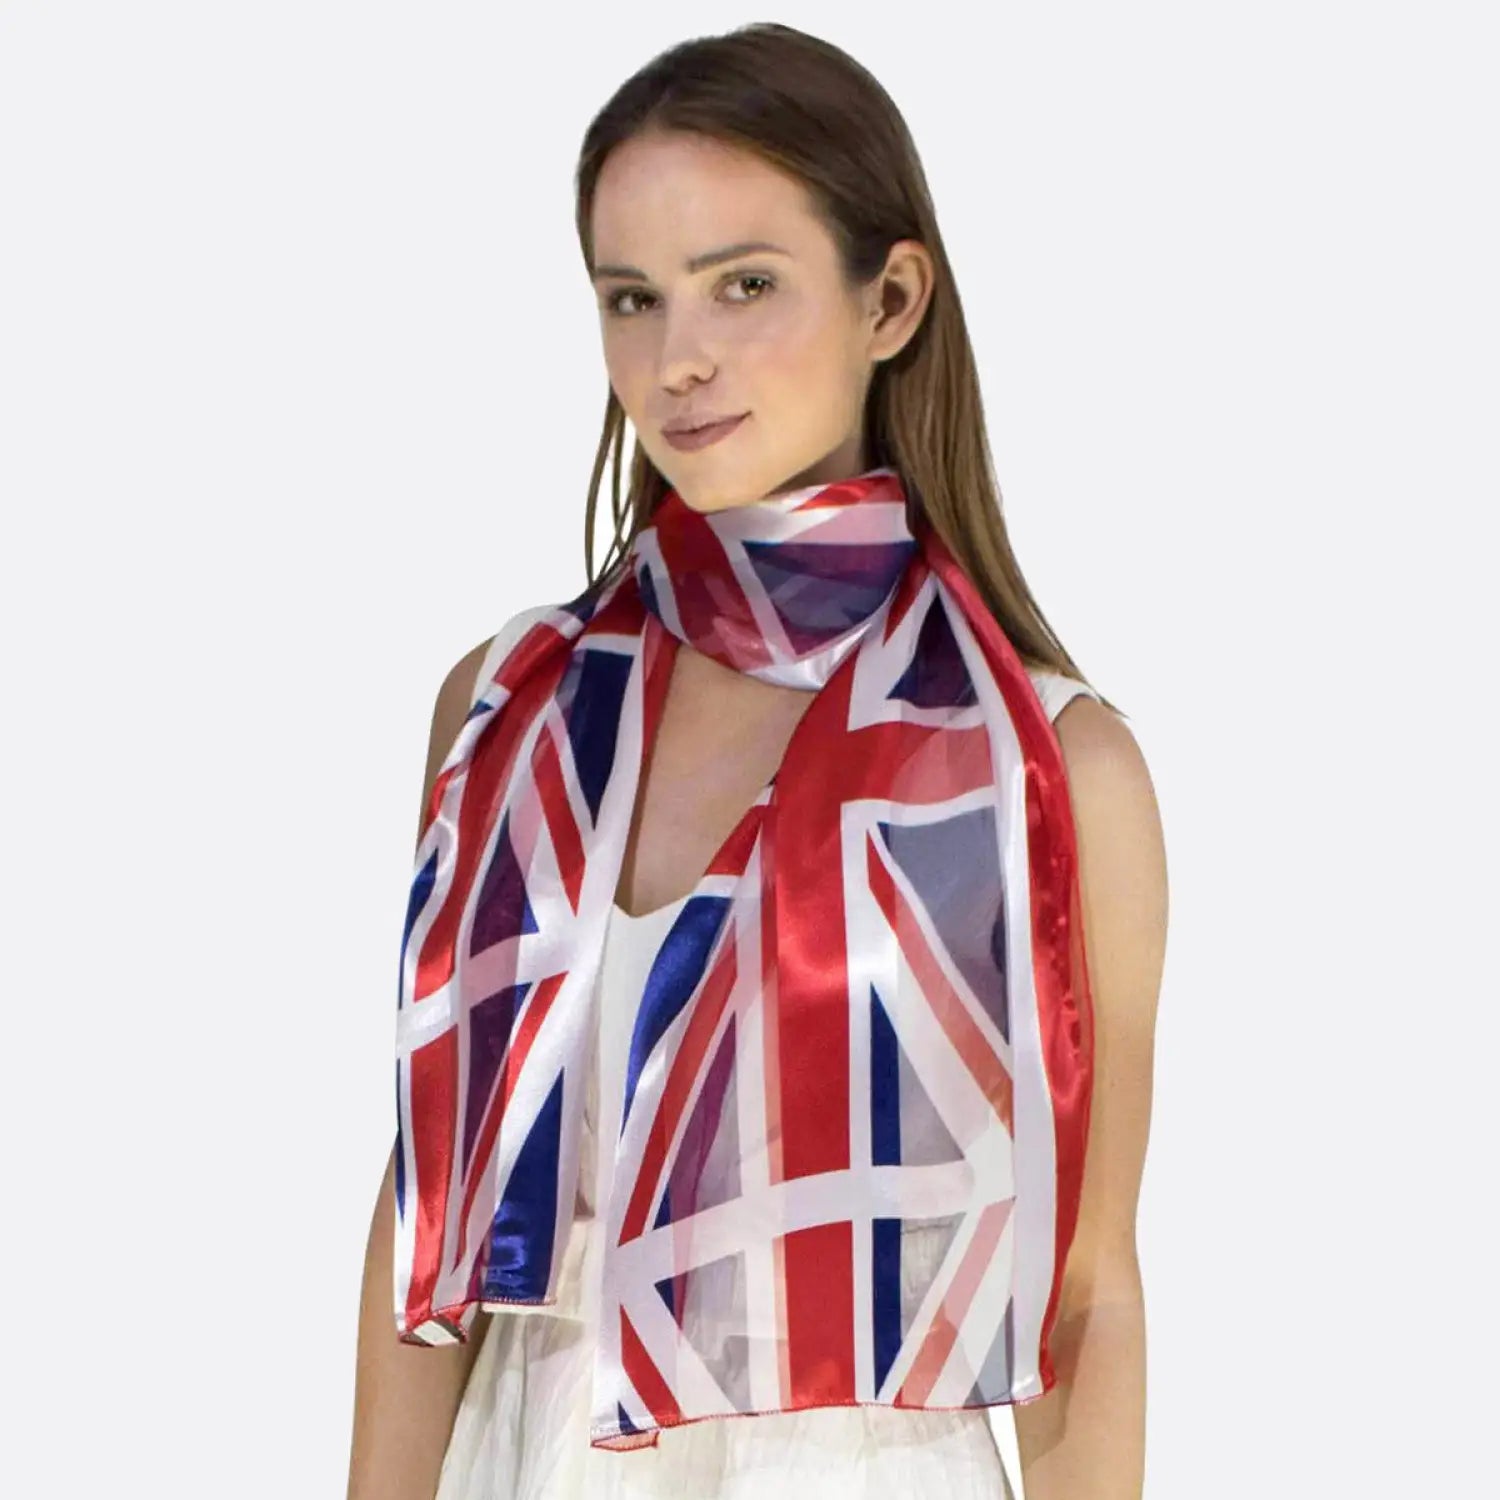 Union Jack Satin Flag Scarf - Show Your Patriotism in Style: Woman wearing red, white, and blue scarf